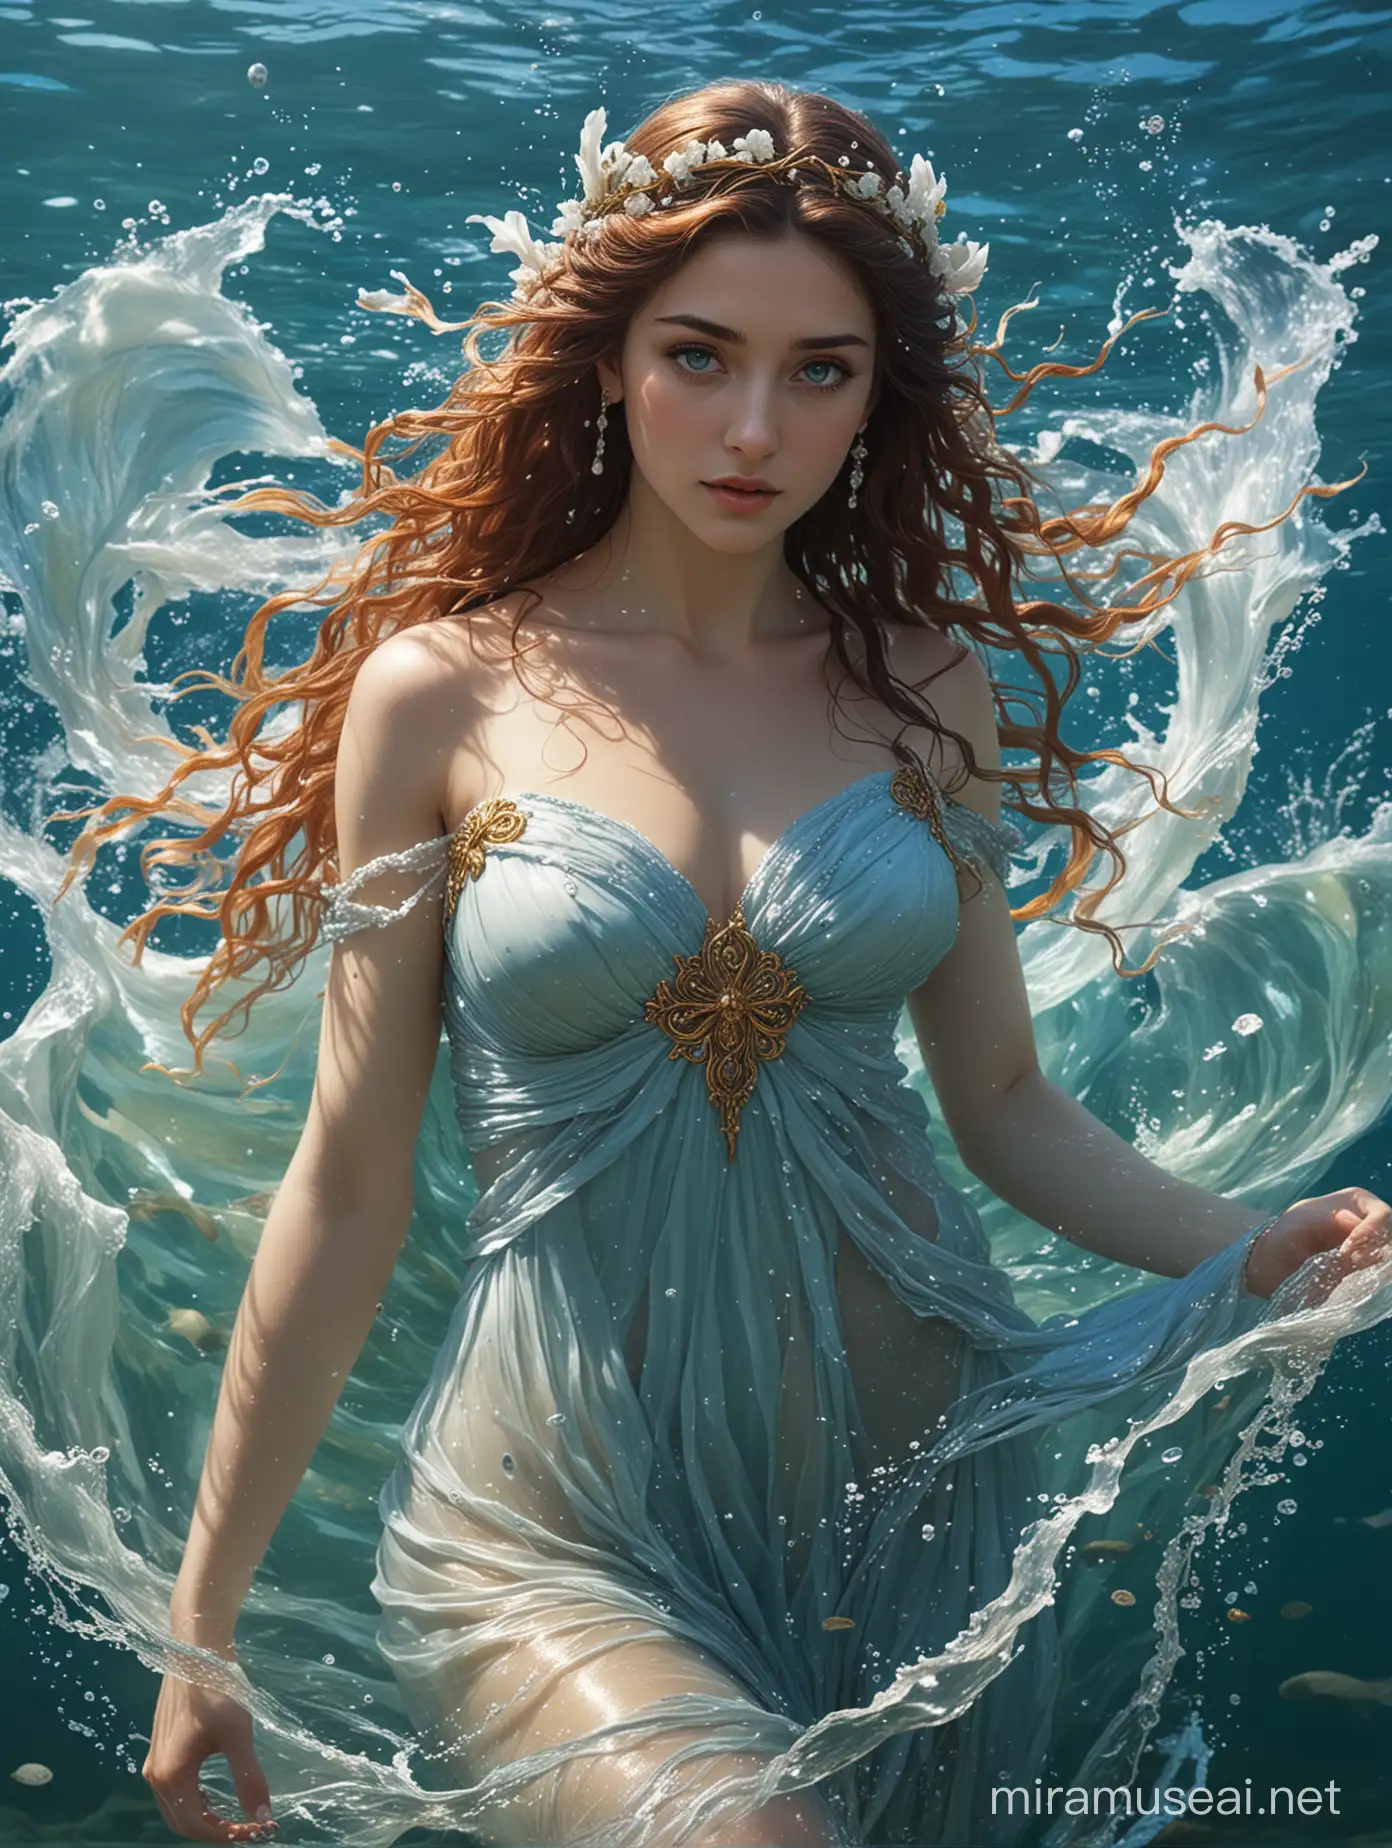 A masterpieced of Kimiya Hosseini as Leucothea, Greek goddess of the sea. She is under the sea, and her Greek dress flows ethereally in the water until it mixes with the water until it disappears. She has has blue eyes.

